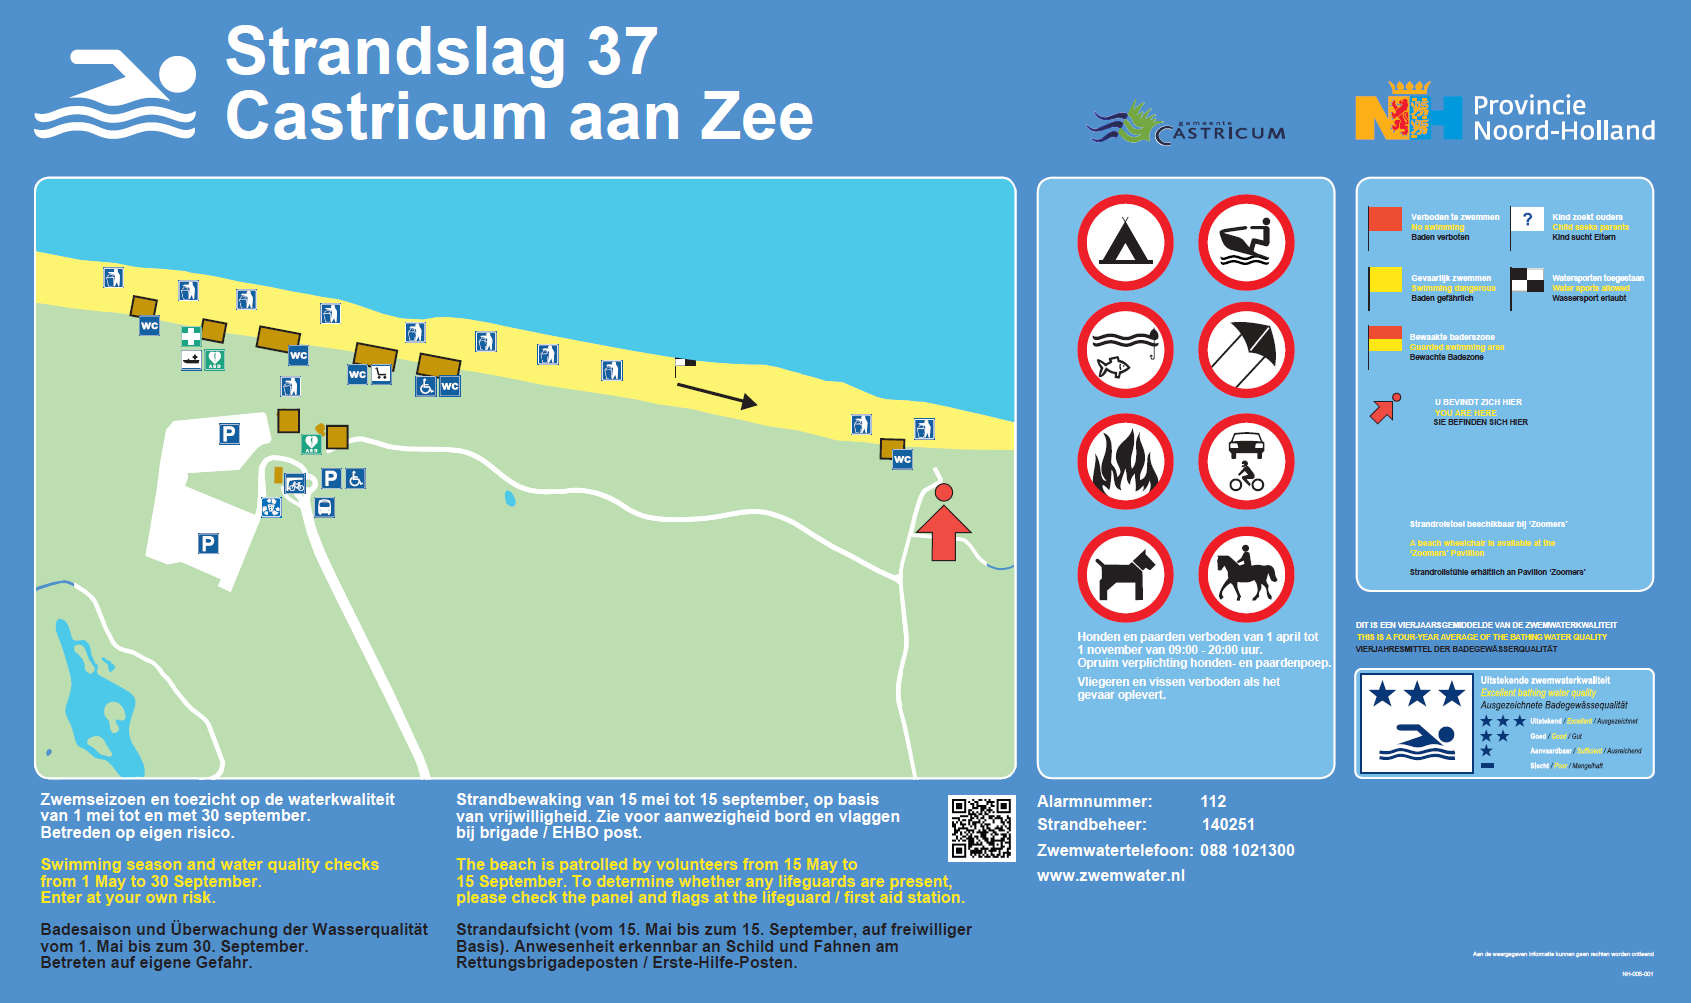 The information board at the swimming location Castricum aan Zee, Bad Noord, Strandslag 37